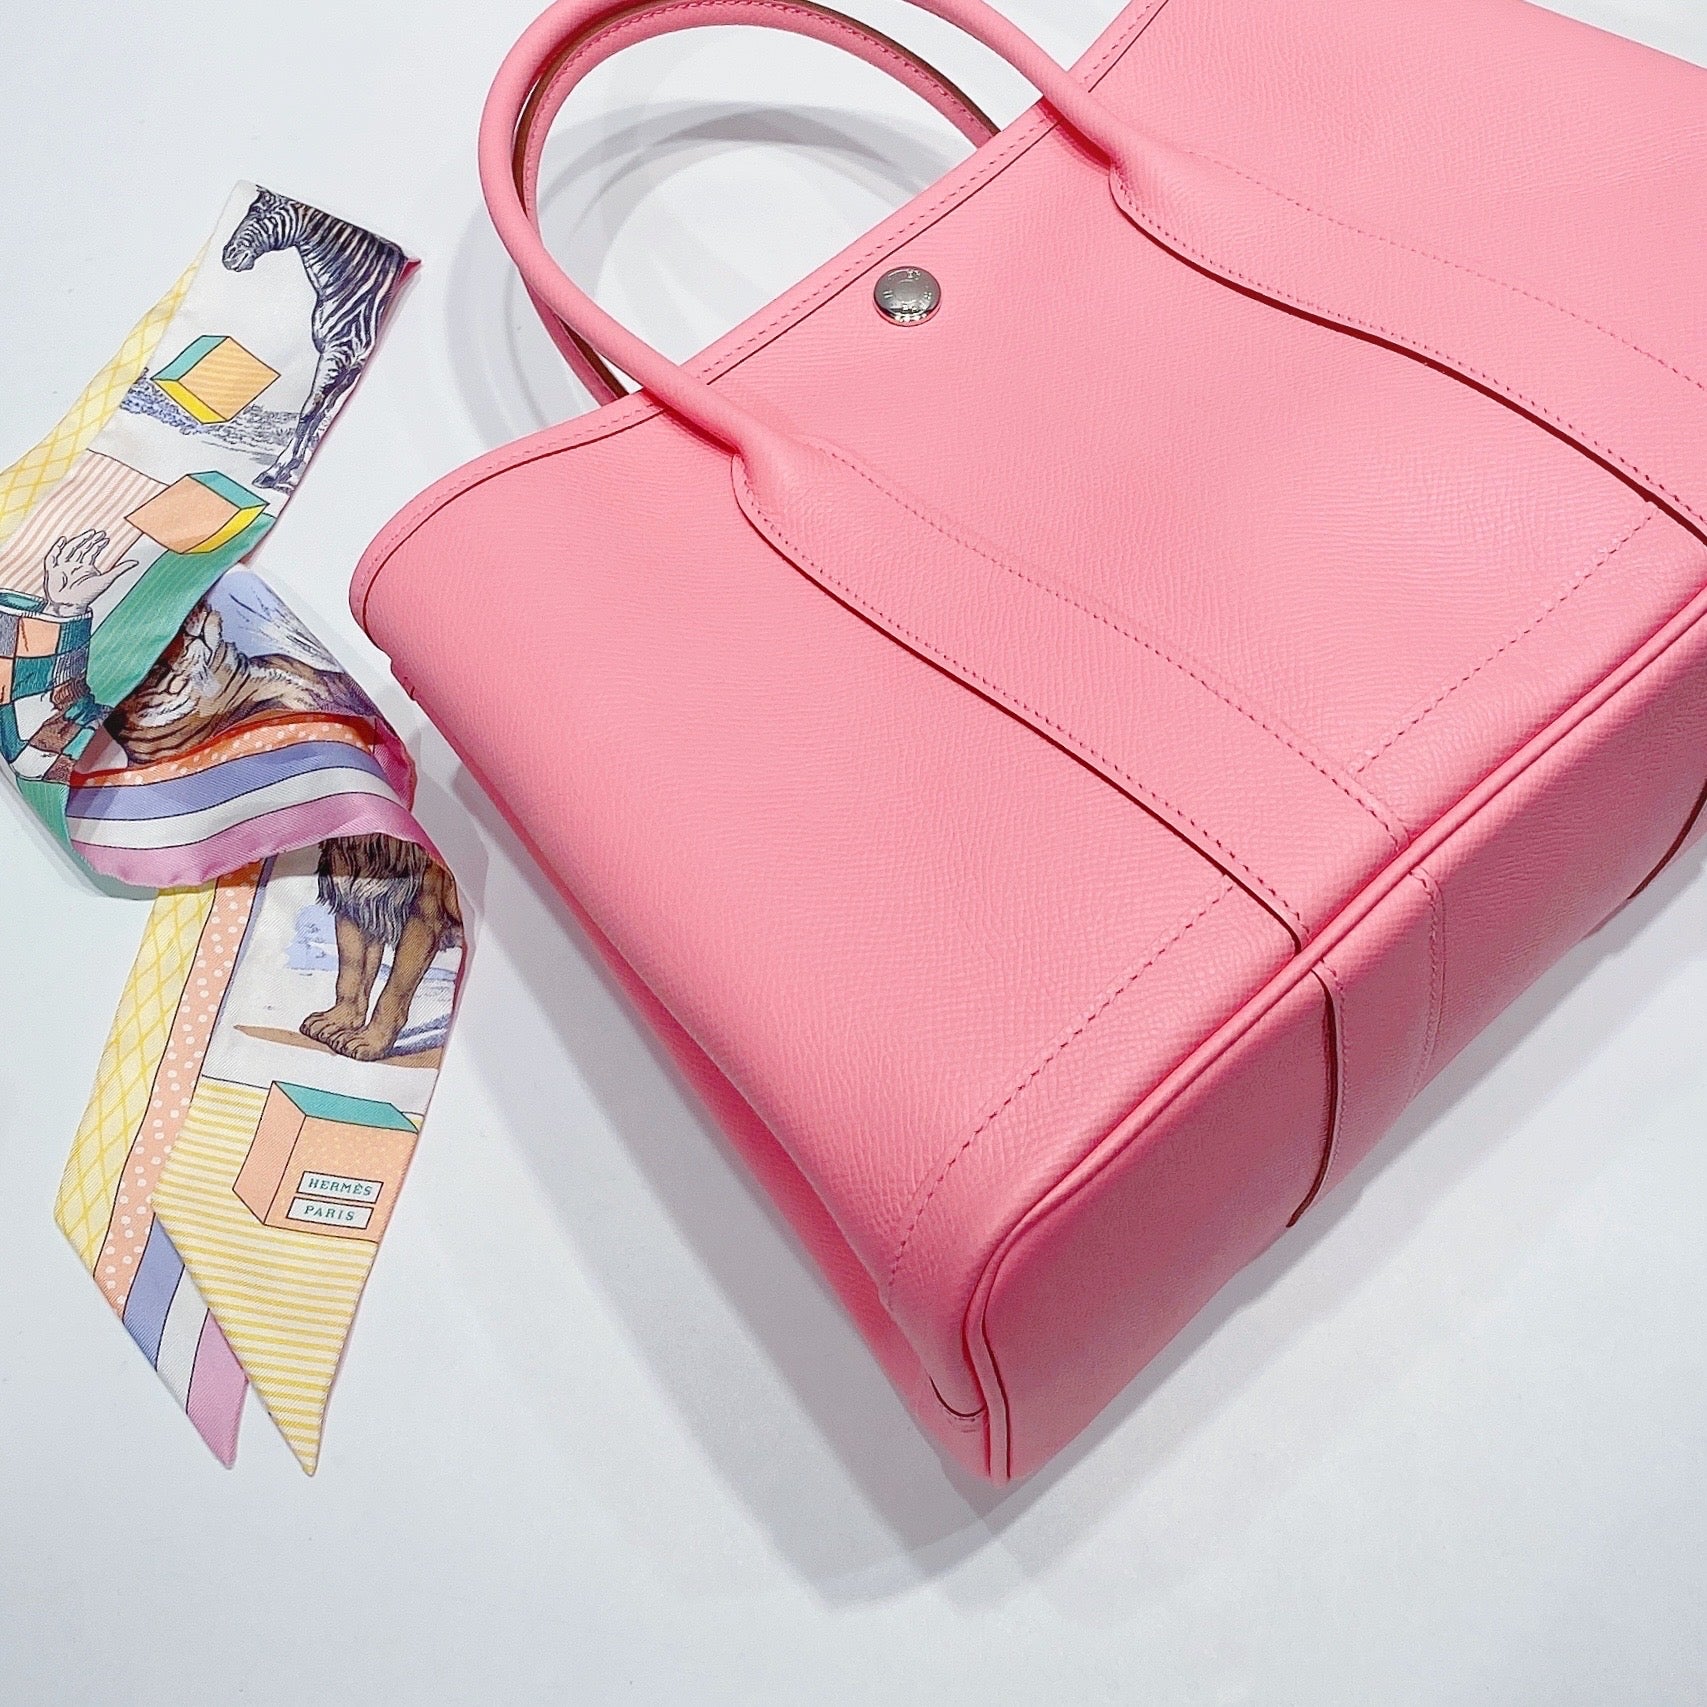 Hermes Garden Party in Pink Confetti!